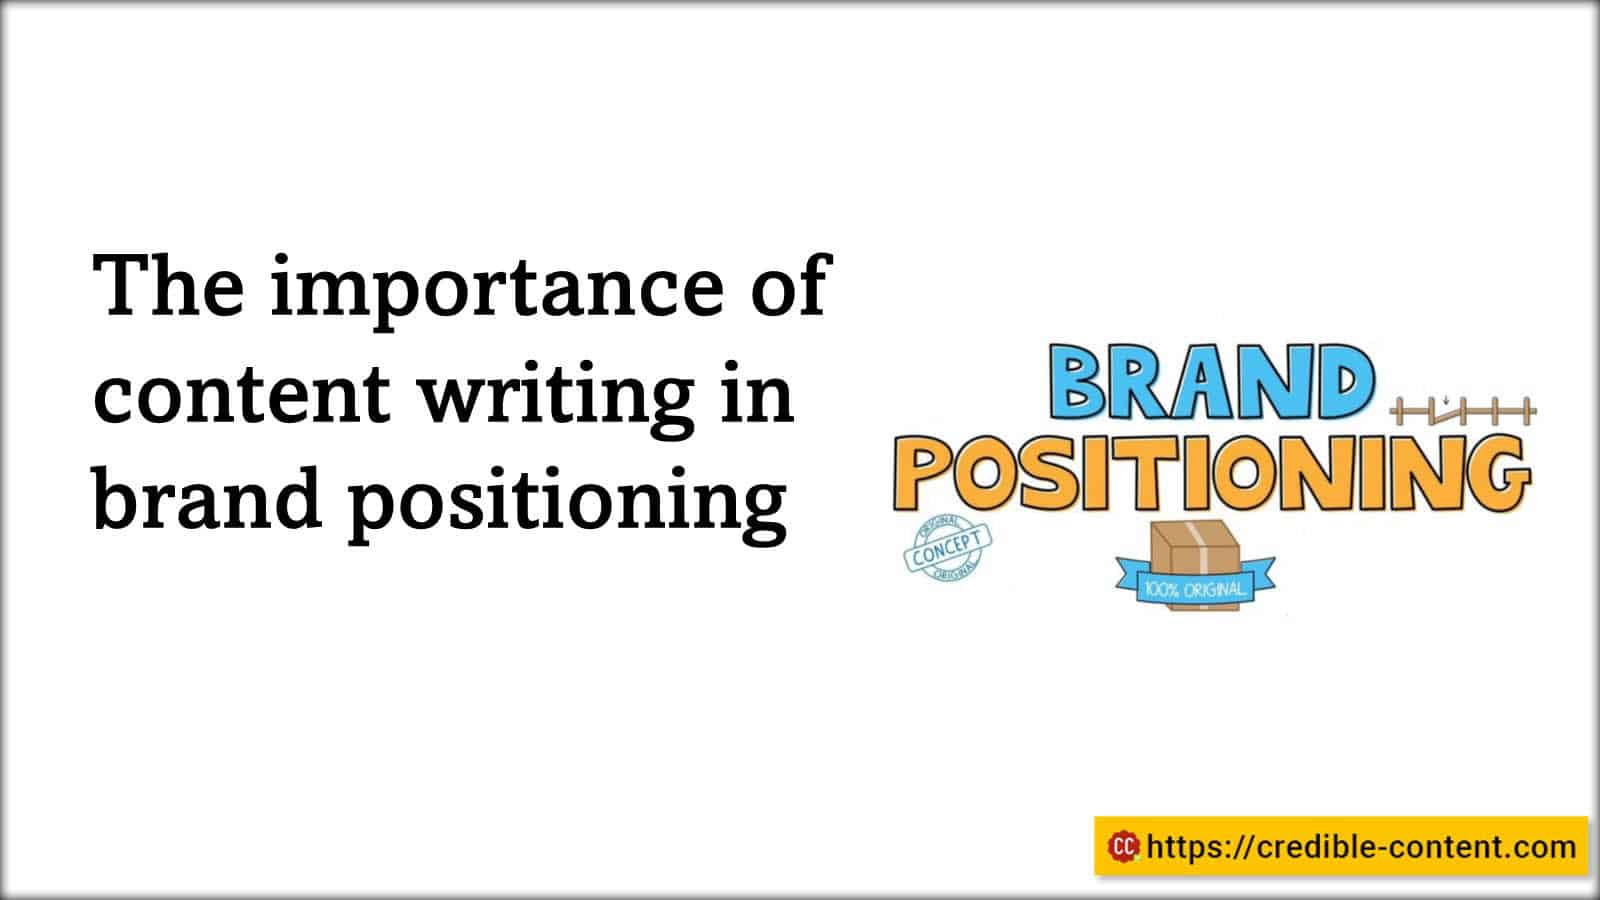 The importance of content writing in brand positioning